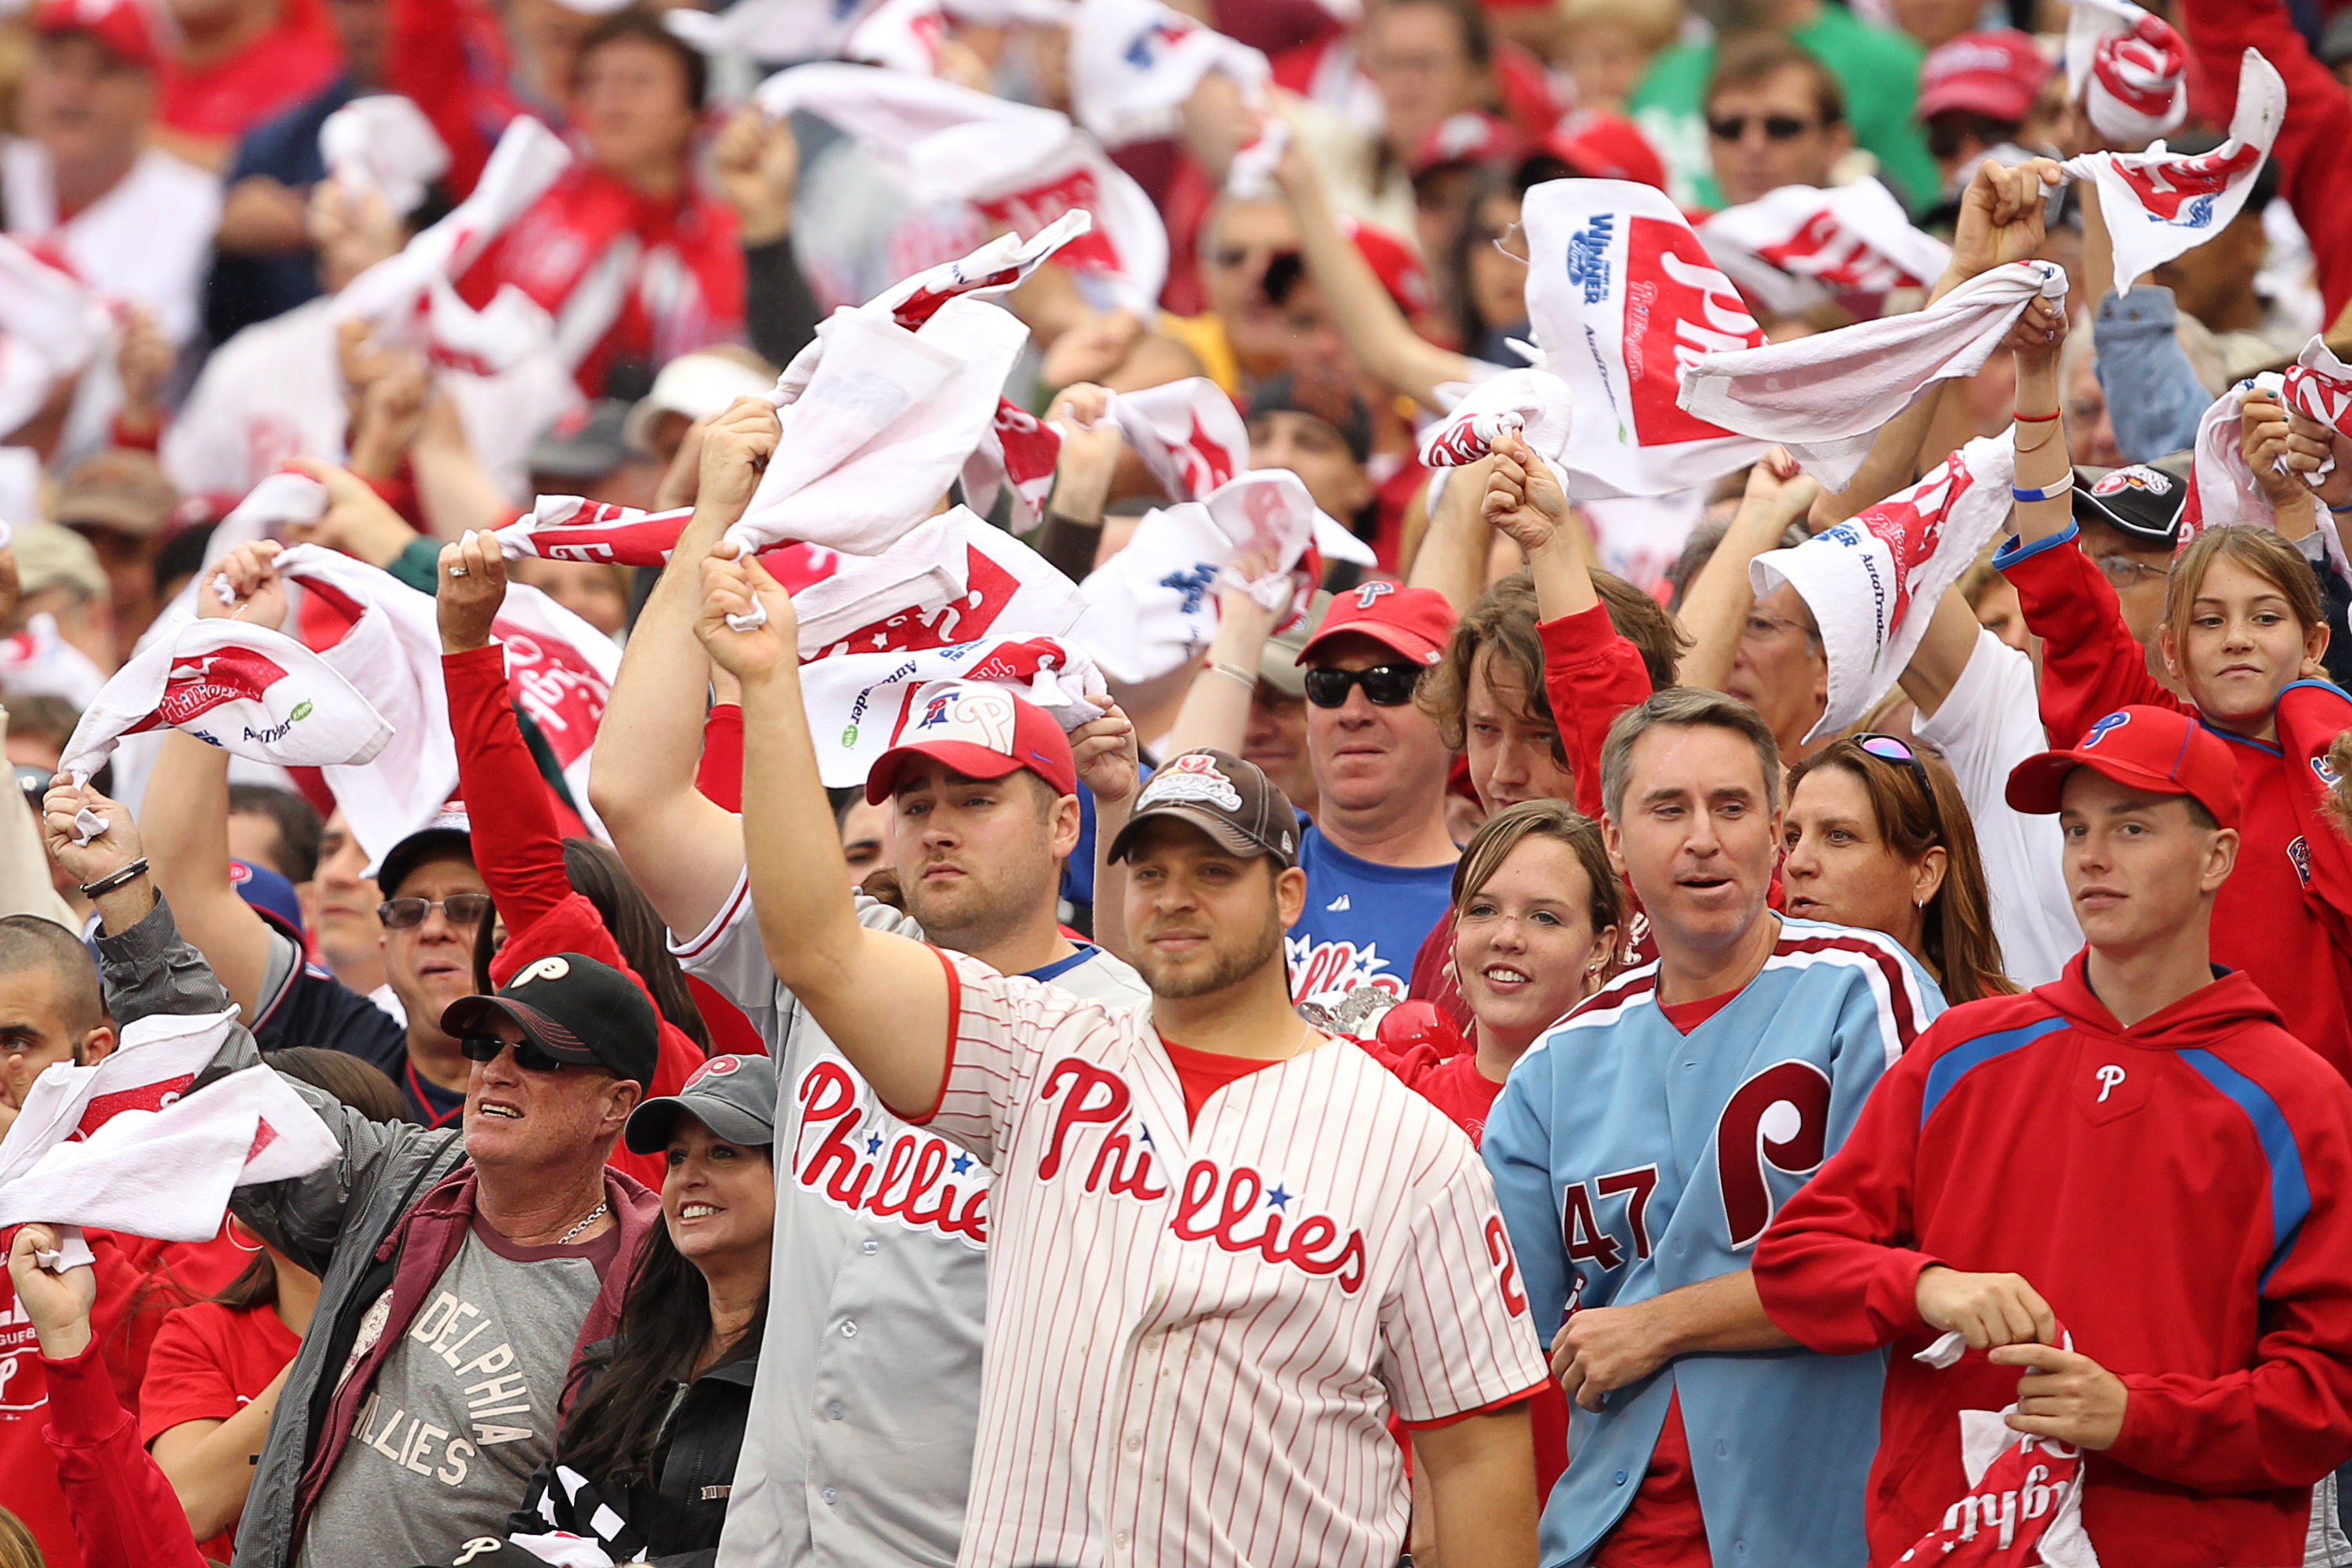 PHILADELPHIA - SEPTEMBER 26: Philadelphia Phillies fans wave rally towels during a game against the New York Mets at Citizens Bank Park on September 26, 2010 in Philadelphia, Pennsylvania. (Photo by Hunter Martin/Getty Images)